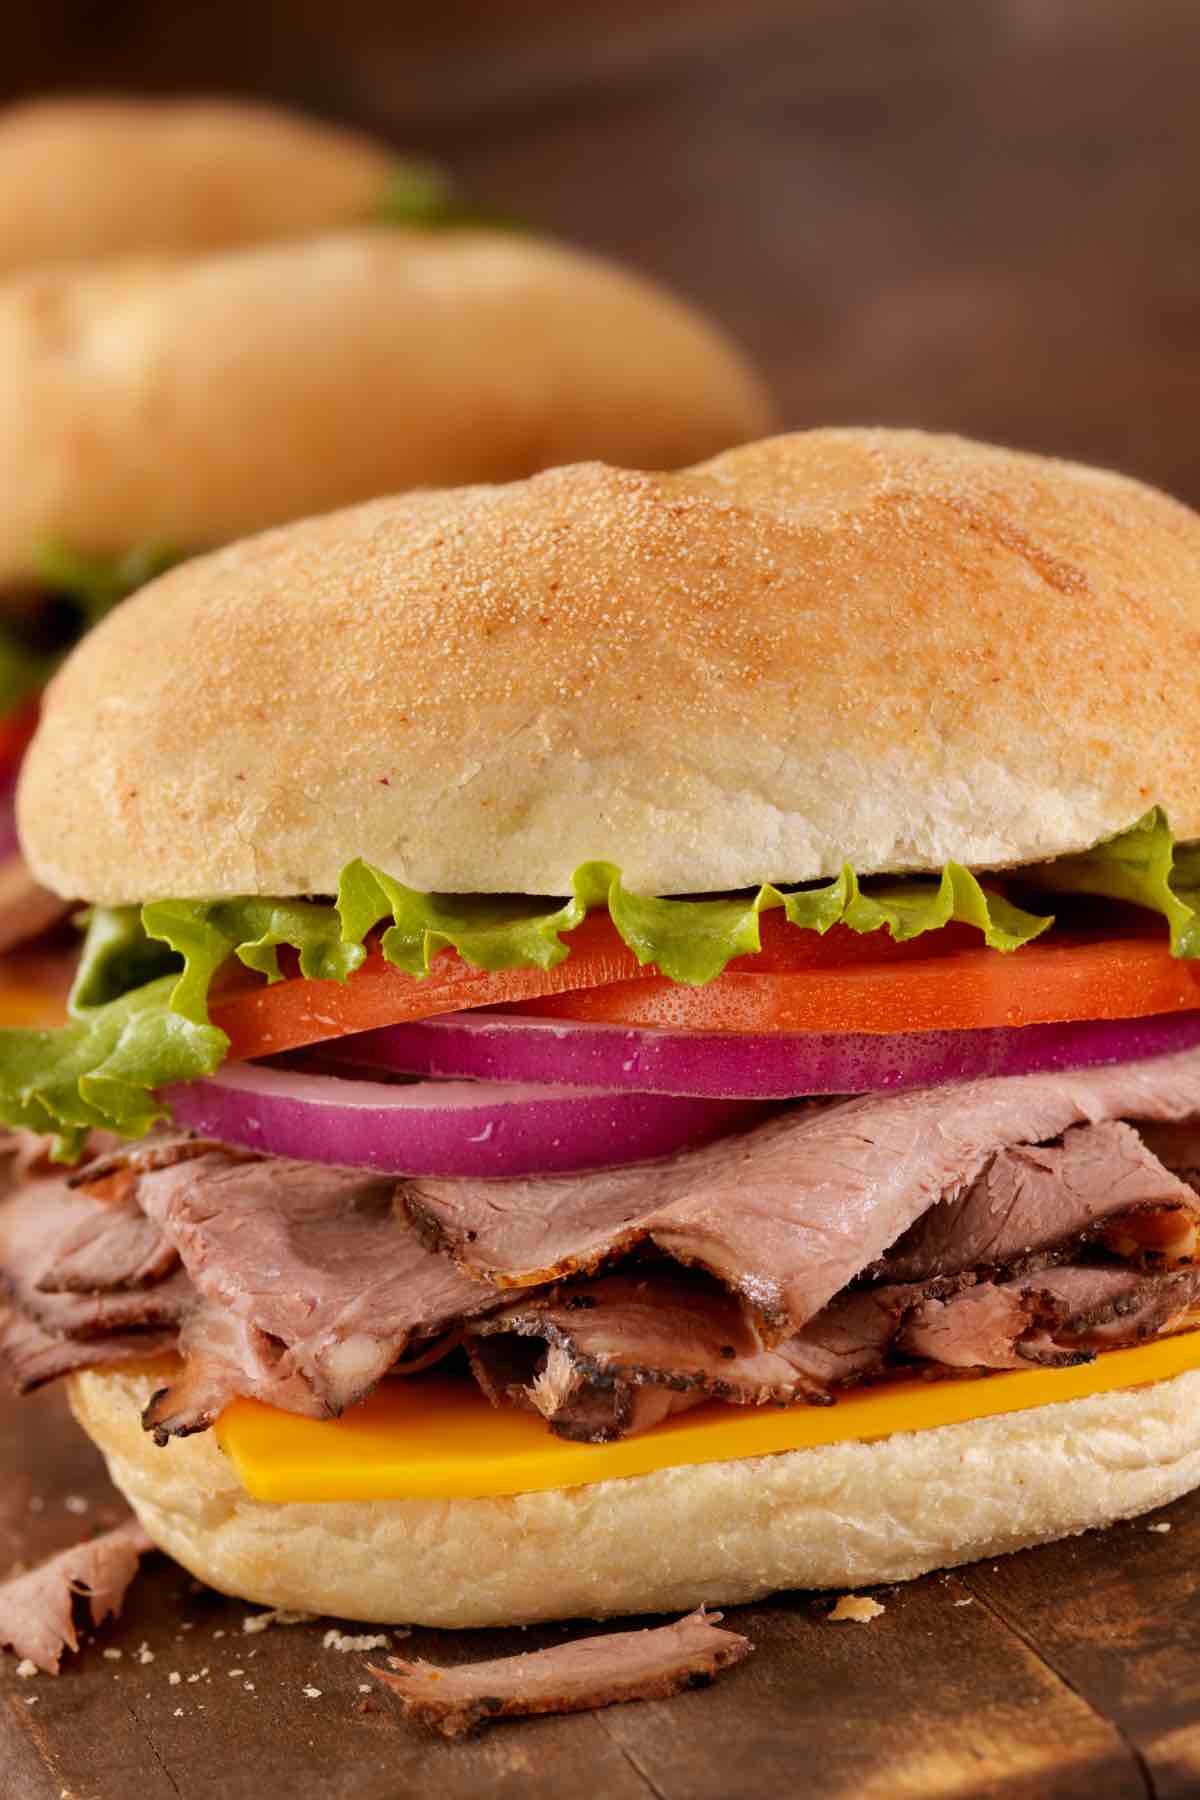 The Roast Beef Sandwich is a classic American sandwich made popular by diners and chain restaurants such as Arby’s. This homemade sandwich is so delicious and fairly simple, made with slices of meaty roast beef, veggies, sauces and melted cheese. You can customize it with all your favorite toppings and can be eaten hot or cold.